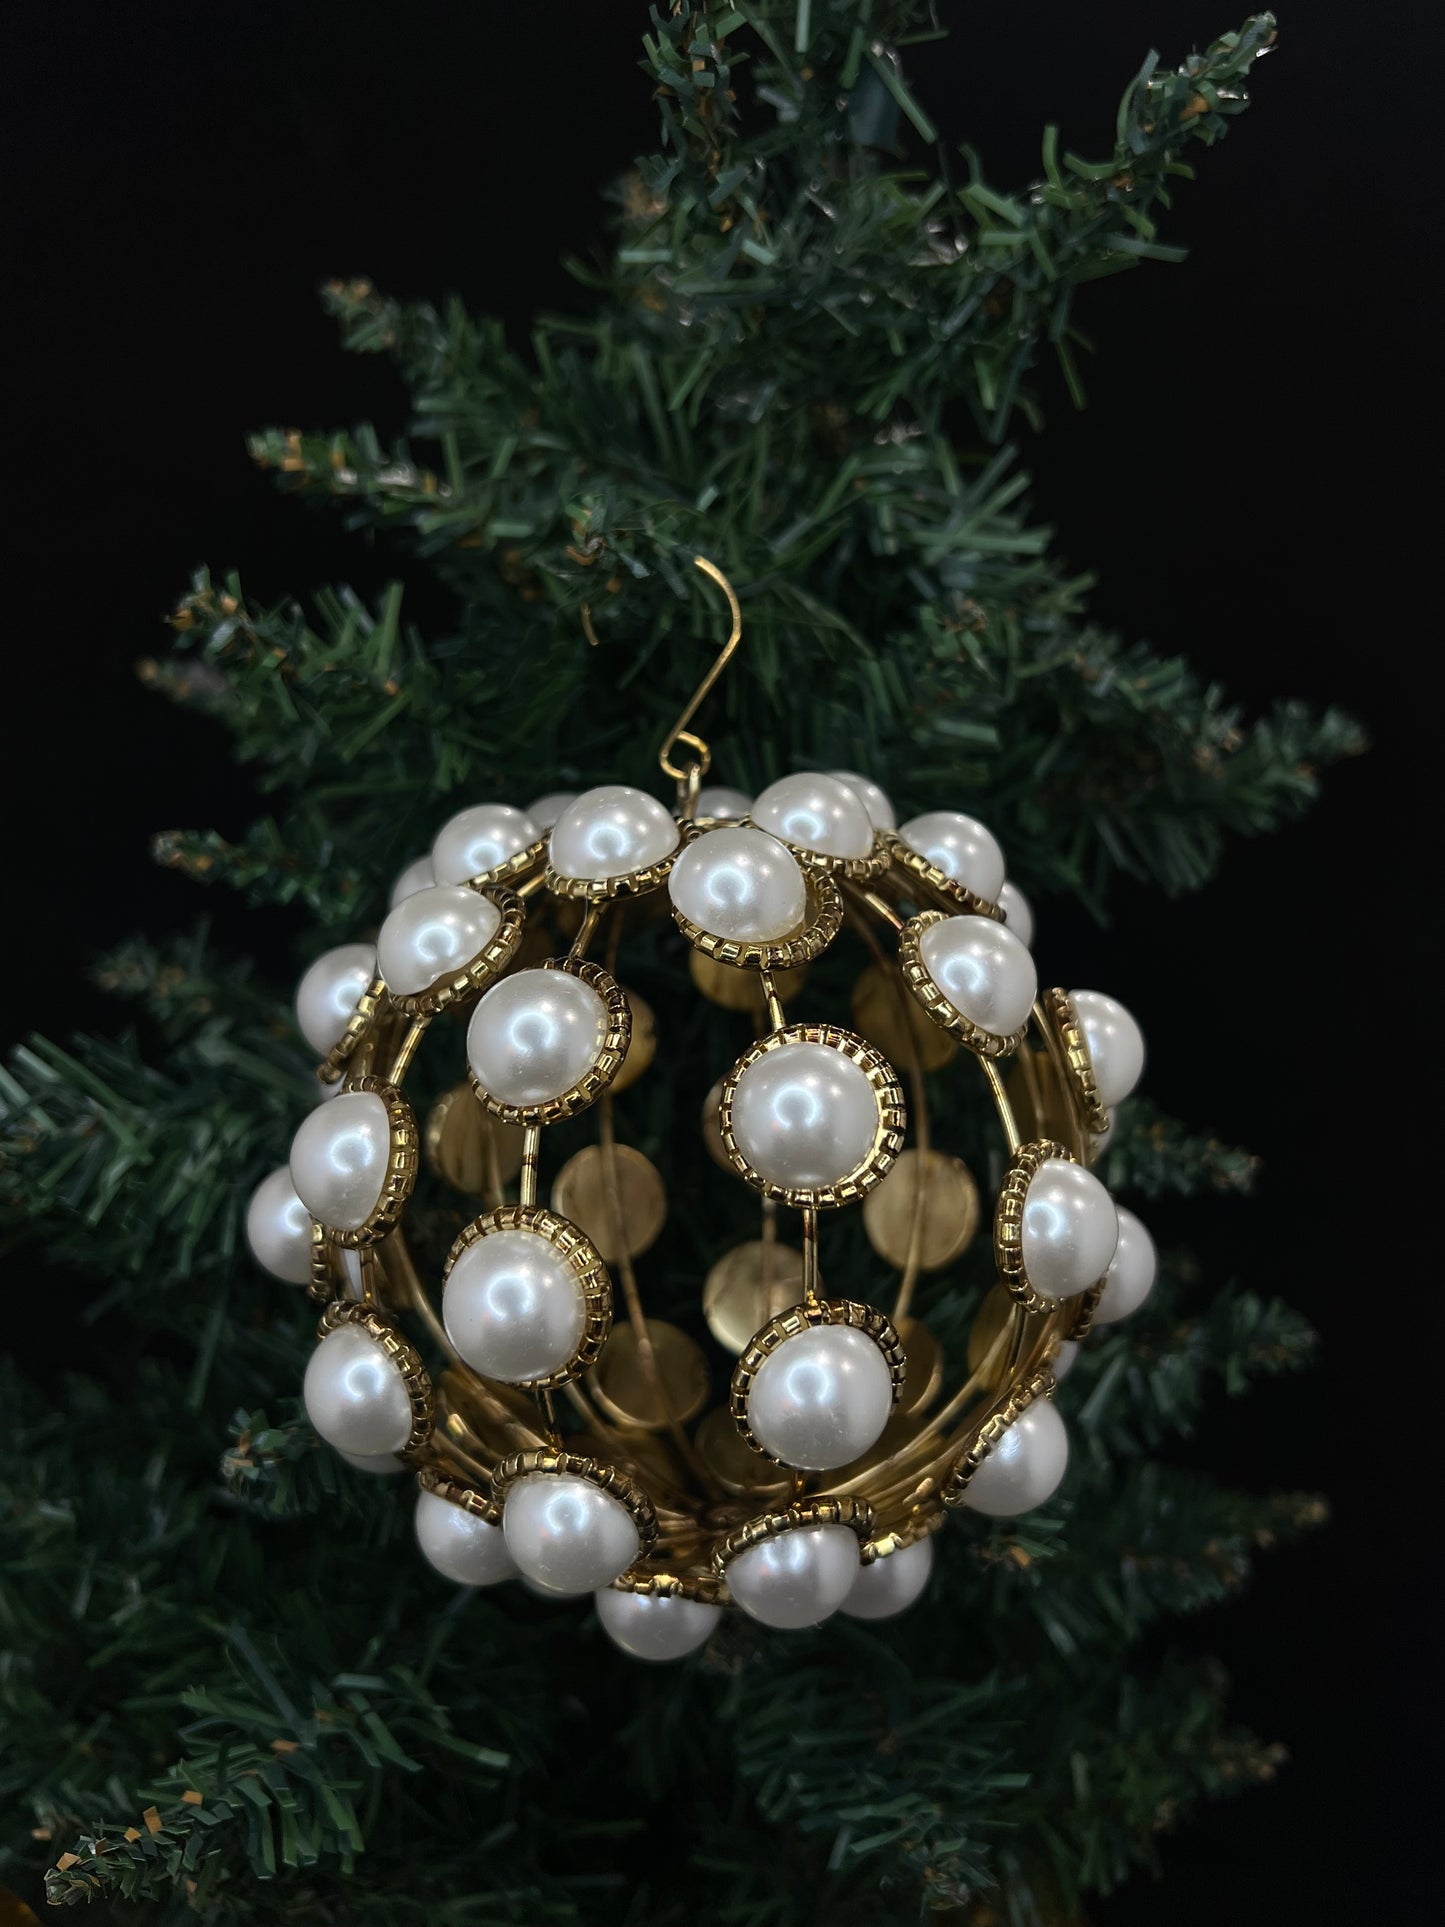 Vintage Pearl Ball Chandelier Ornament